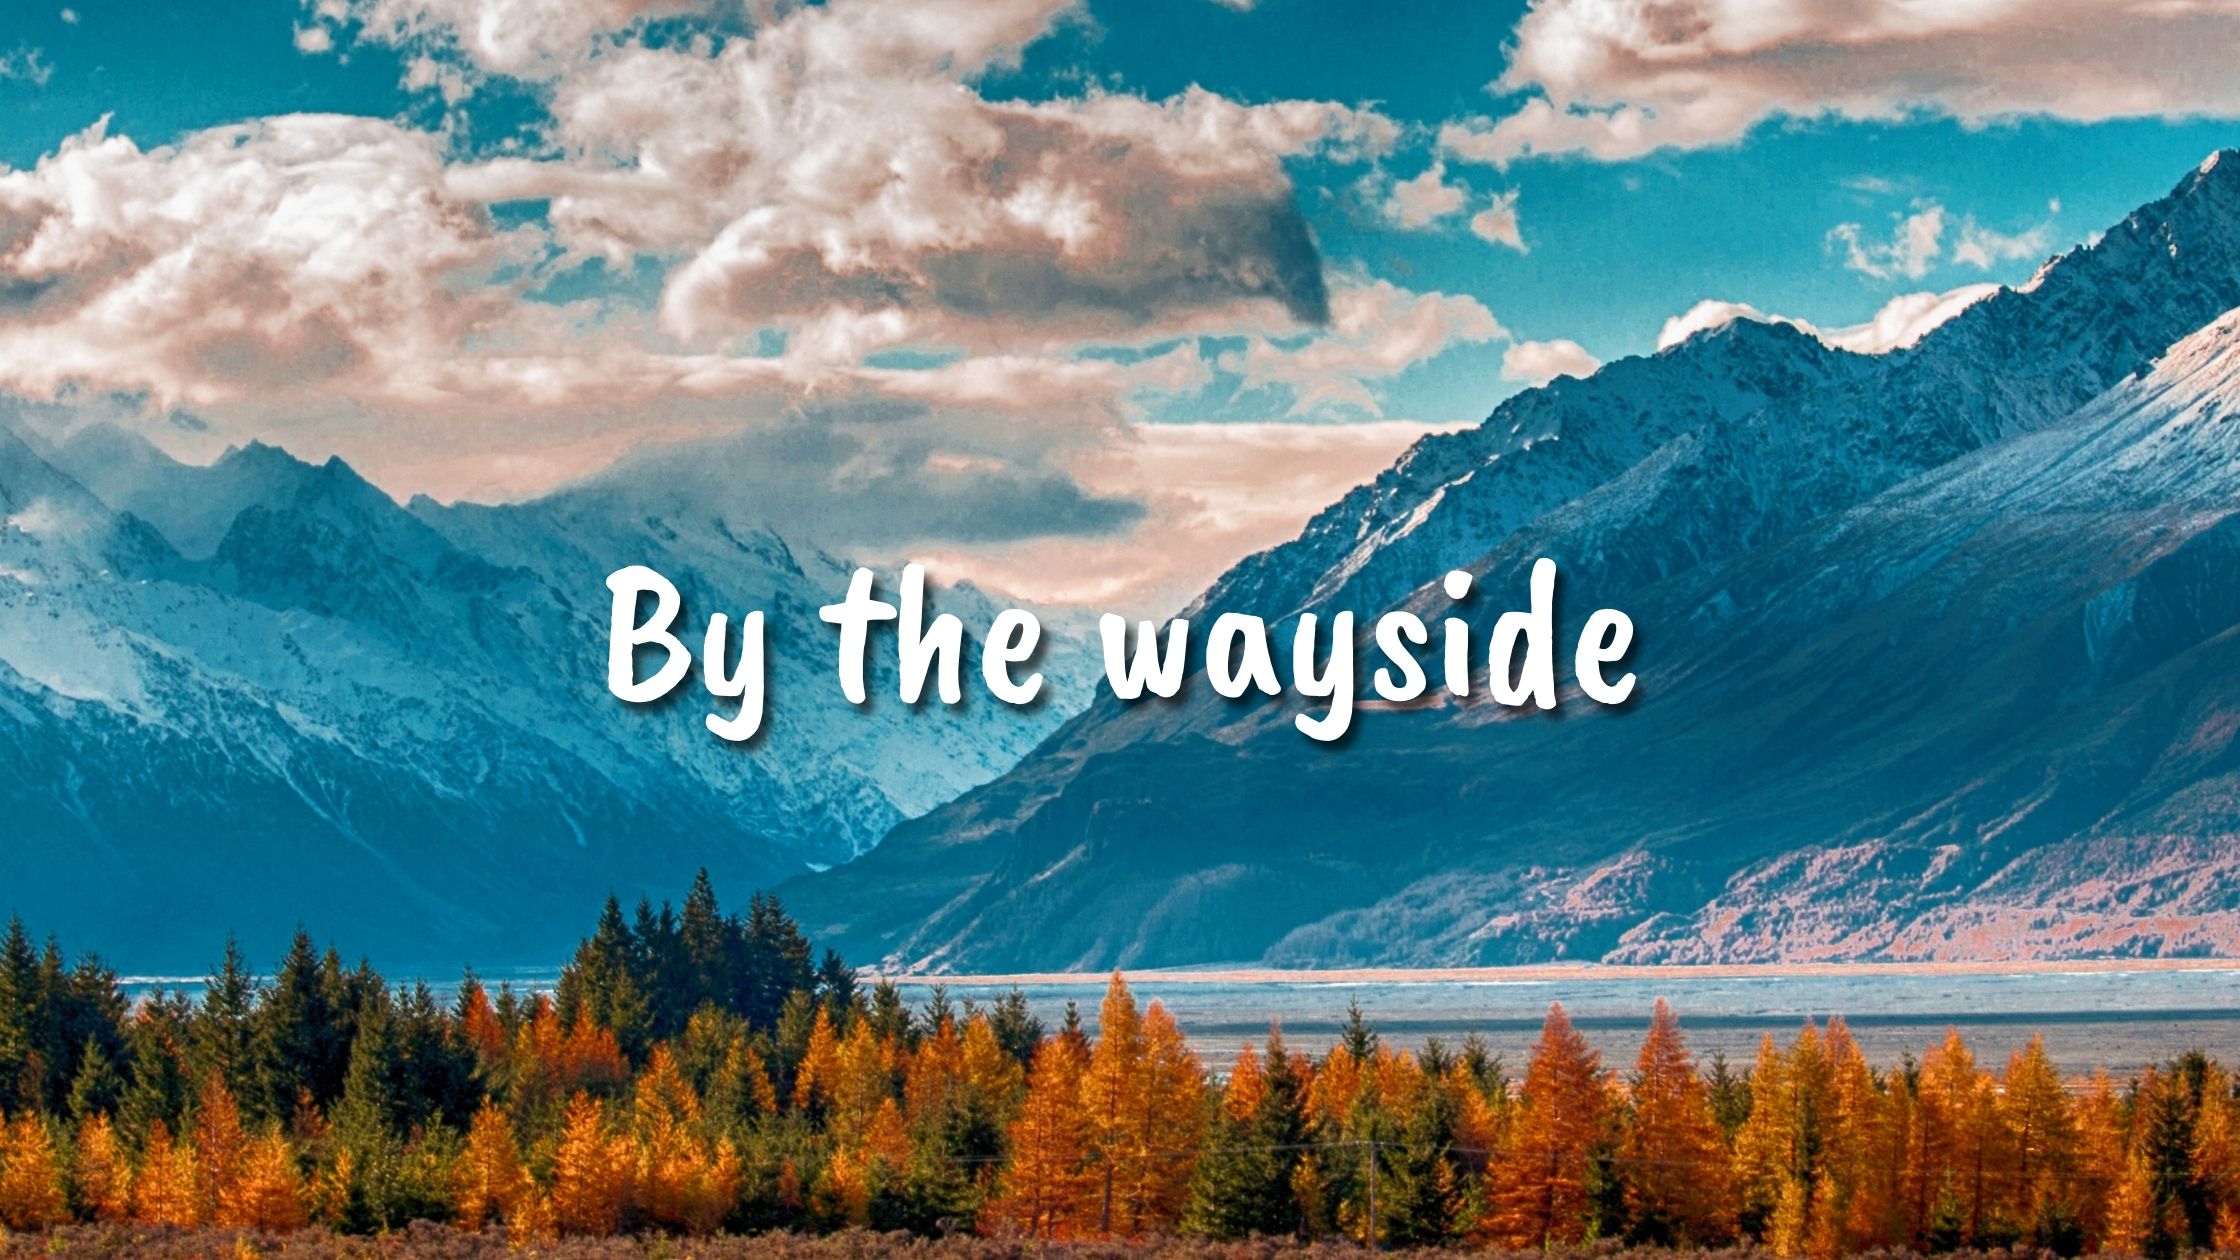 By the wayside